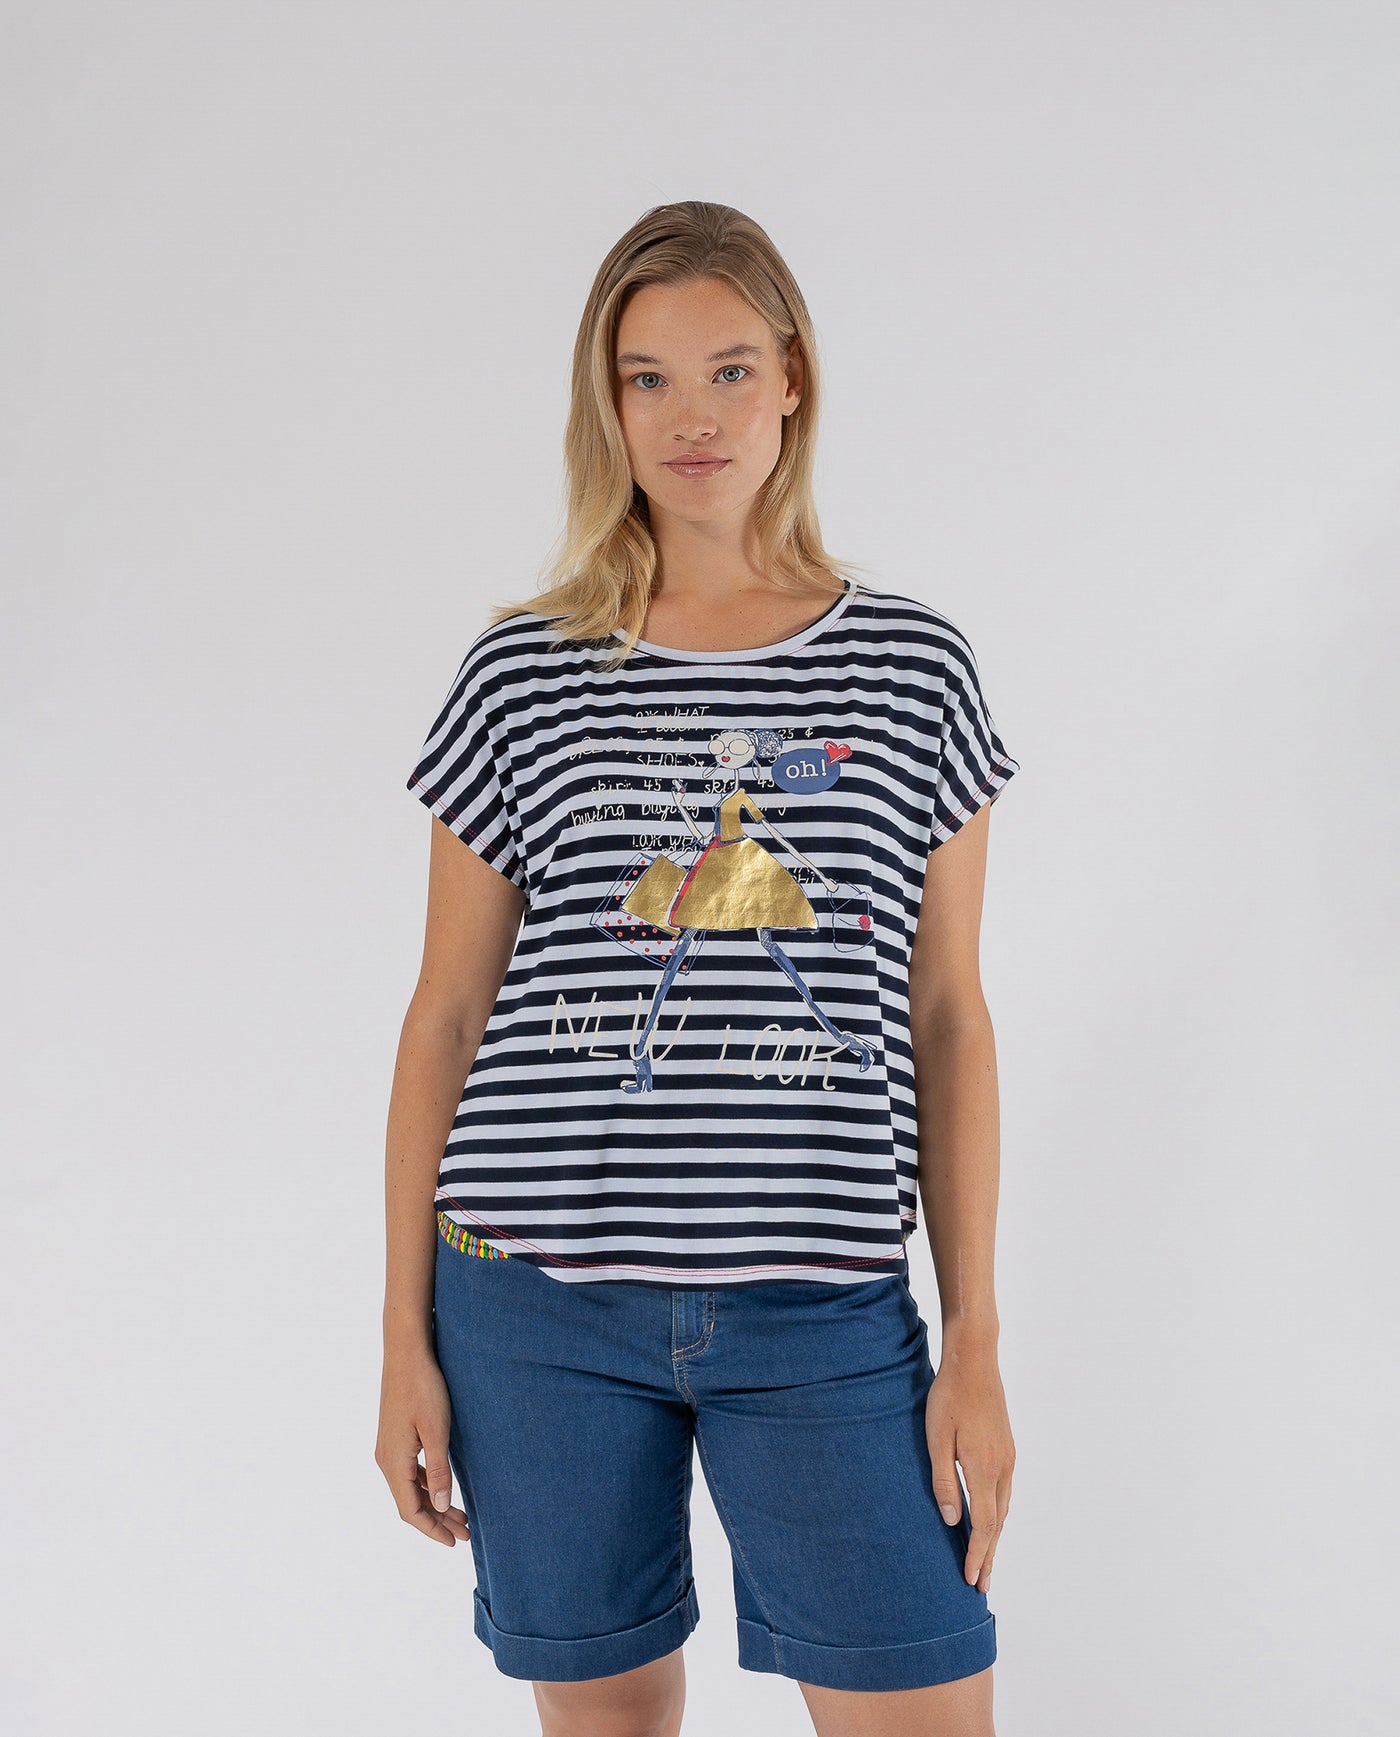 T-SHIRT A RIGHE CON STAMPA POSIZIONALE BLU NAVY